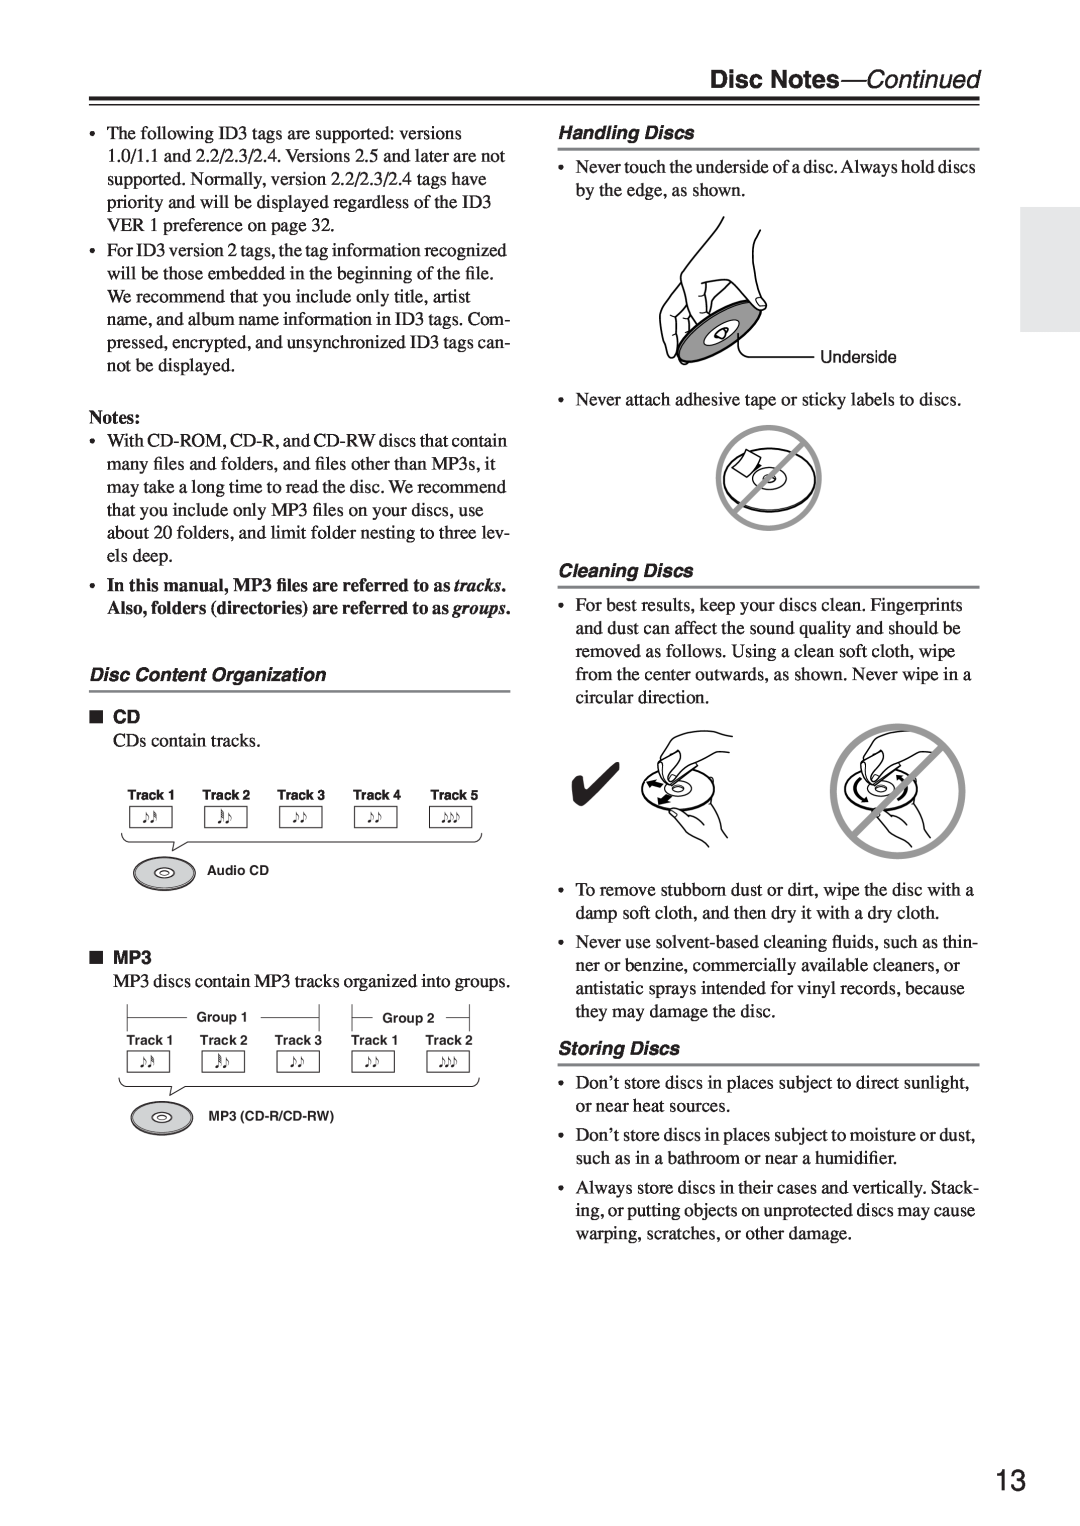 Onkyo CR-N7 Disc Notes-Continued, Disc Content Organization, Handling Discs, Cleaning Discs, Storing Discs 